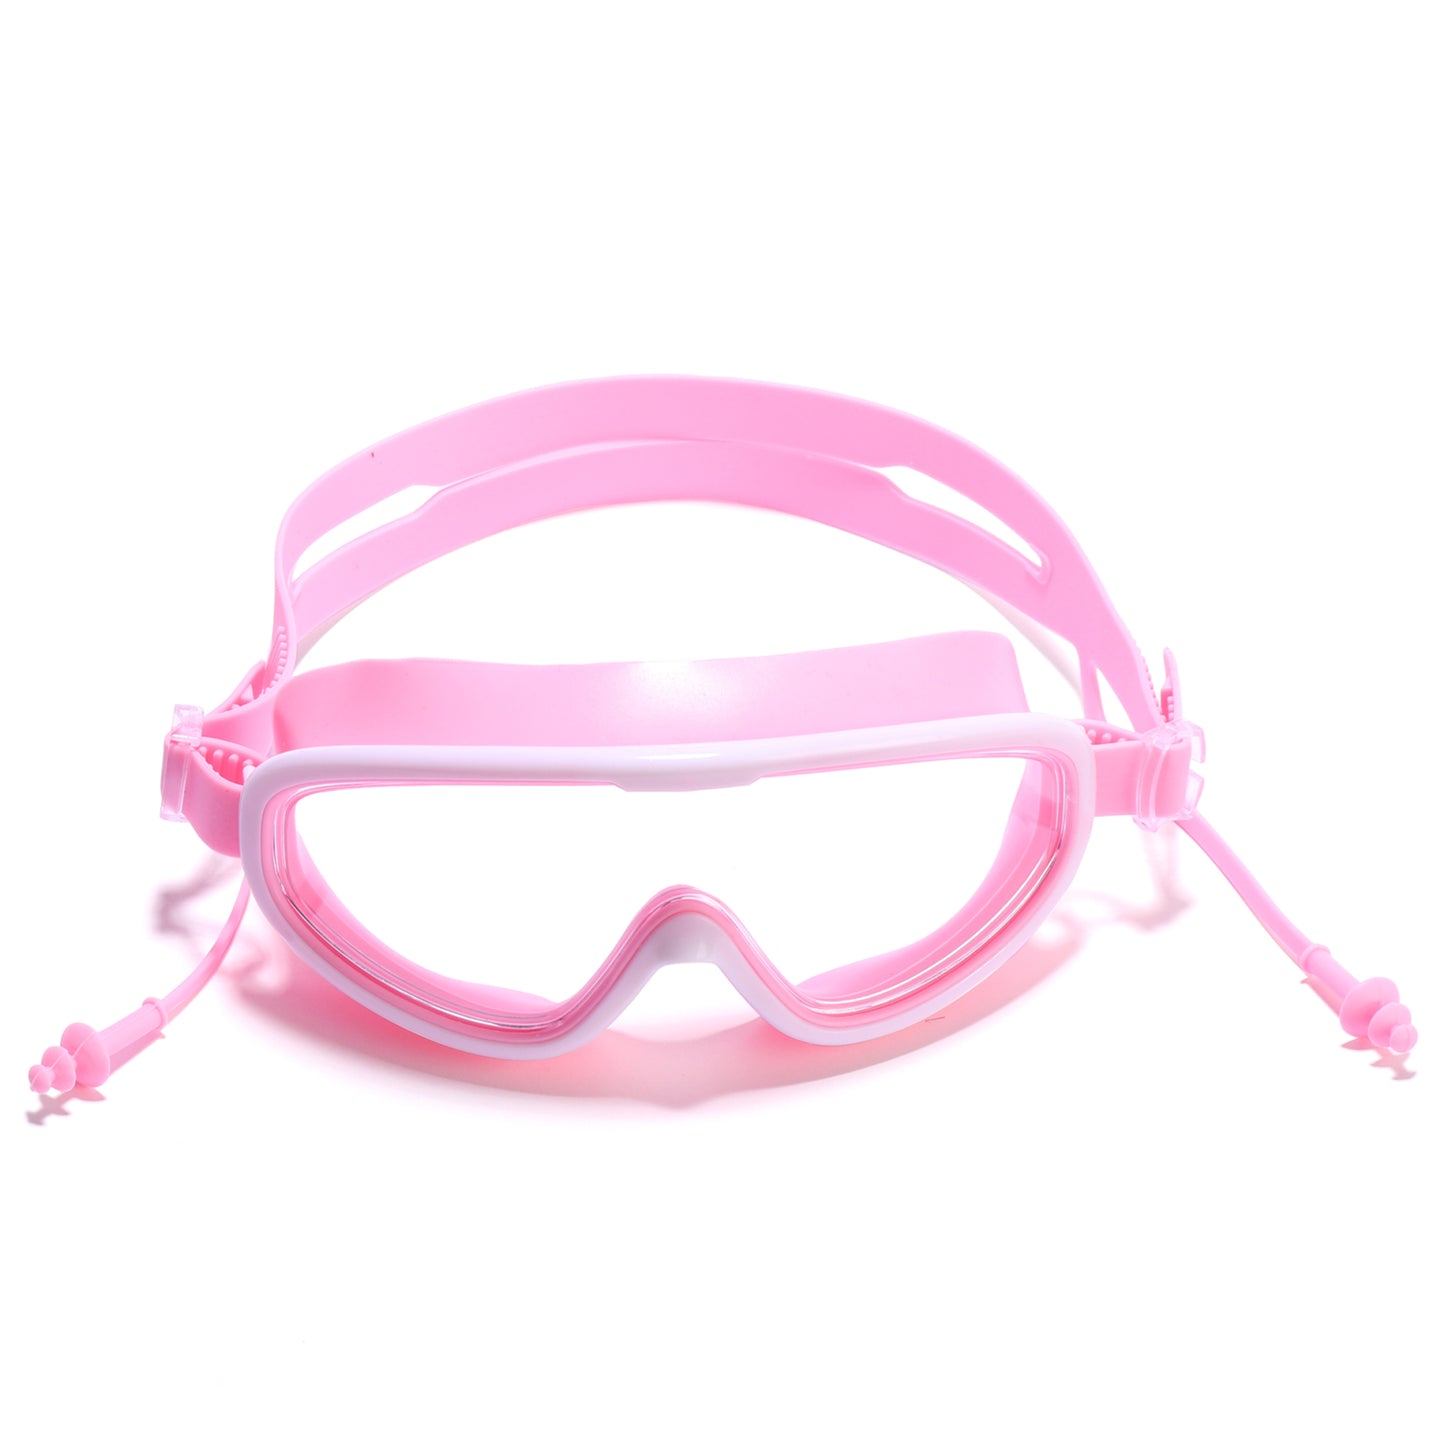 BIG FRAME SWIMMING GOGGLES WITH EAR PLUGS - PINK